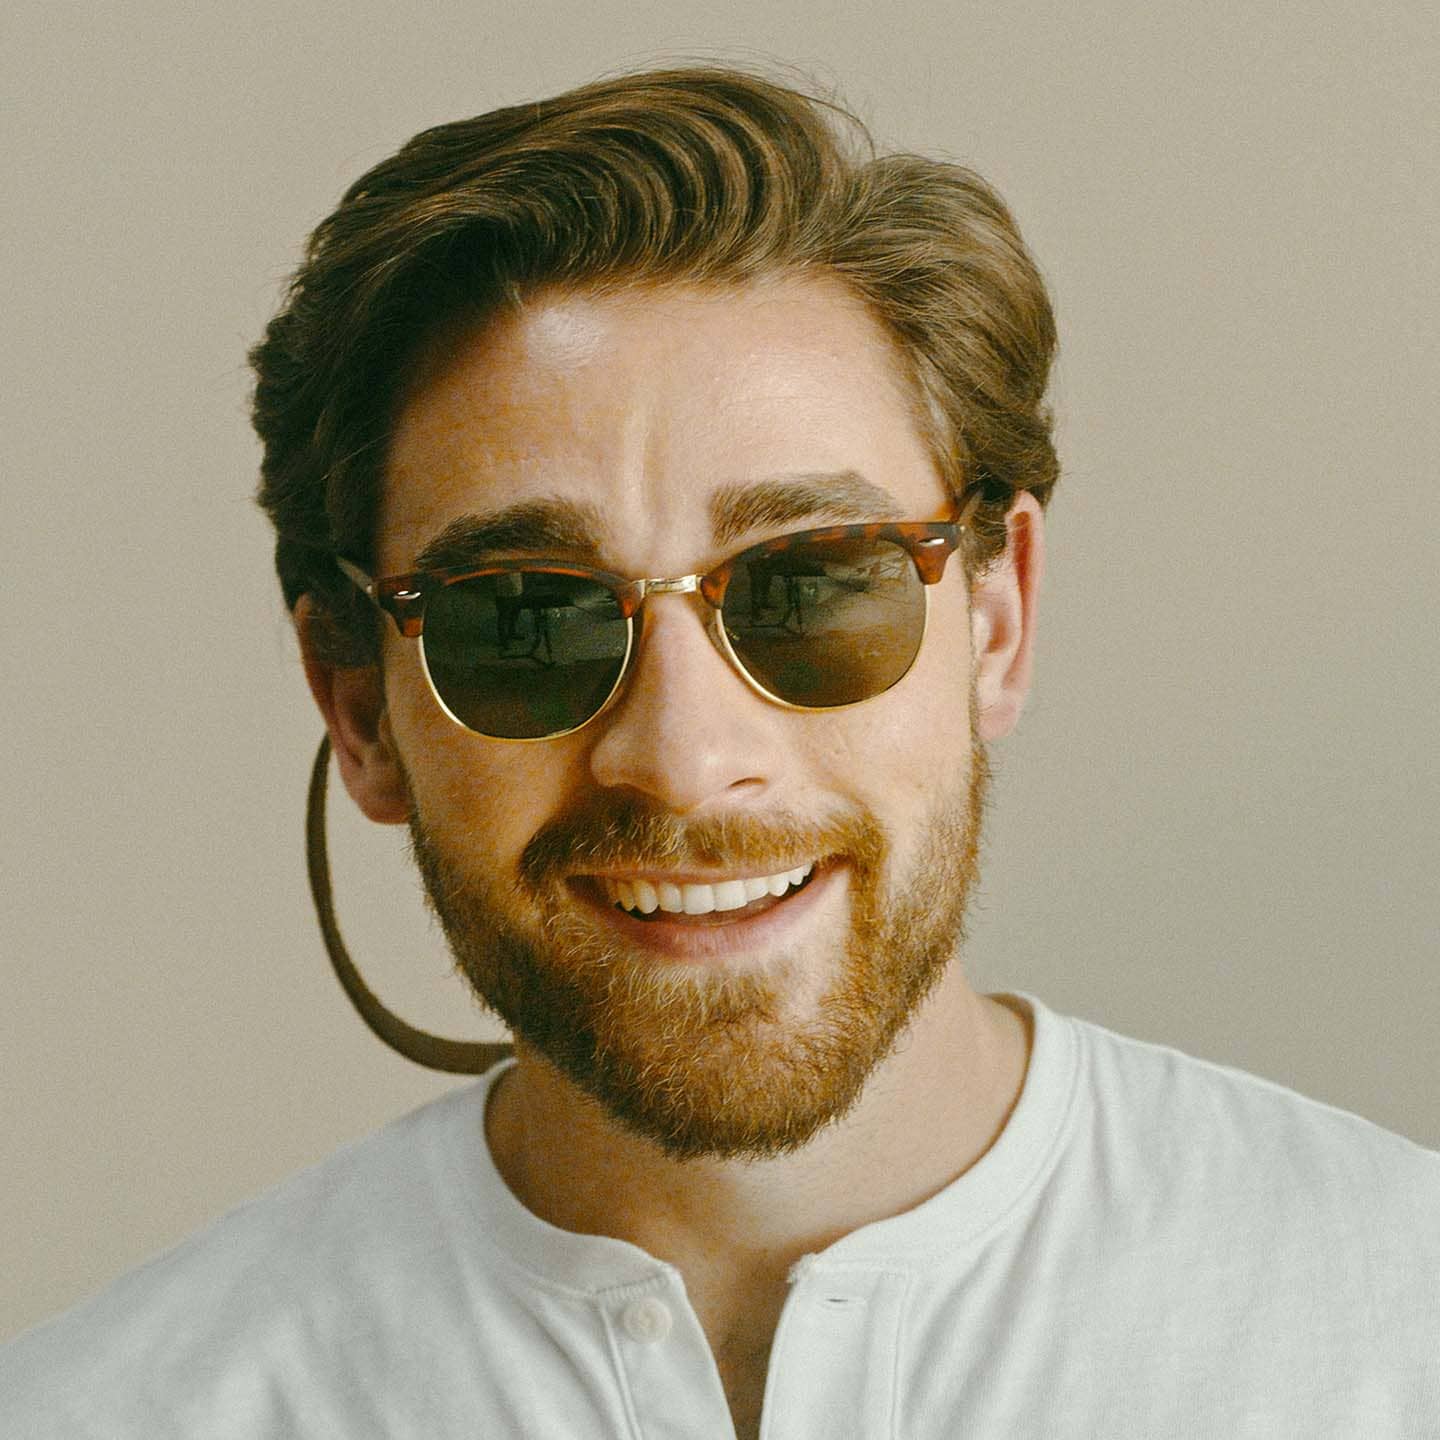 Man wearing sunglasses with leather sunglass strap and smiling at camera.